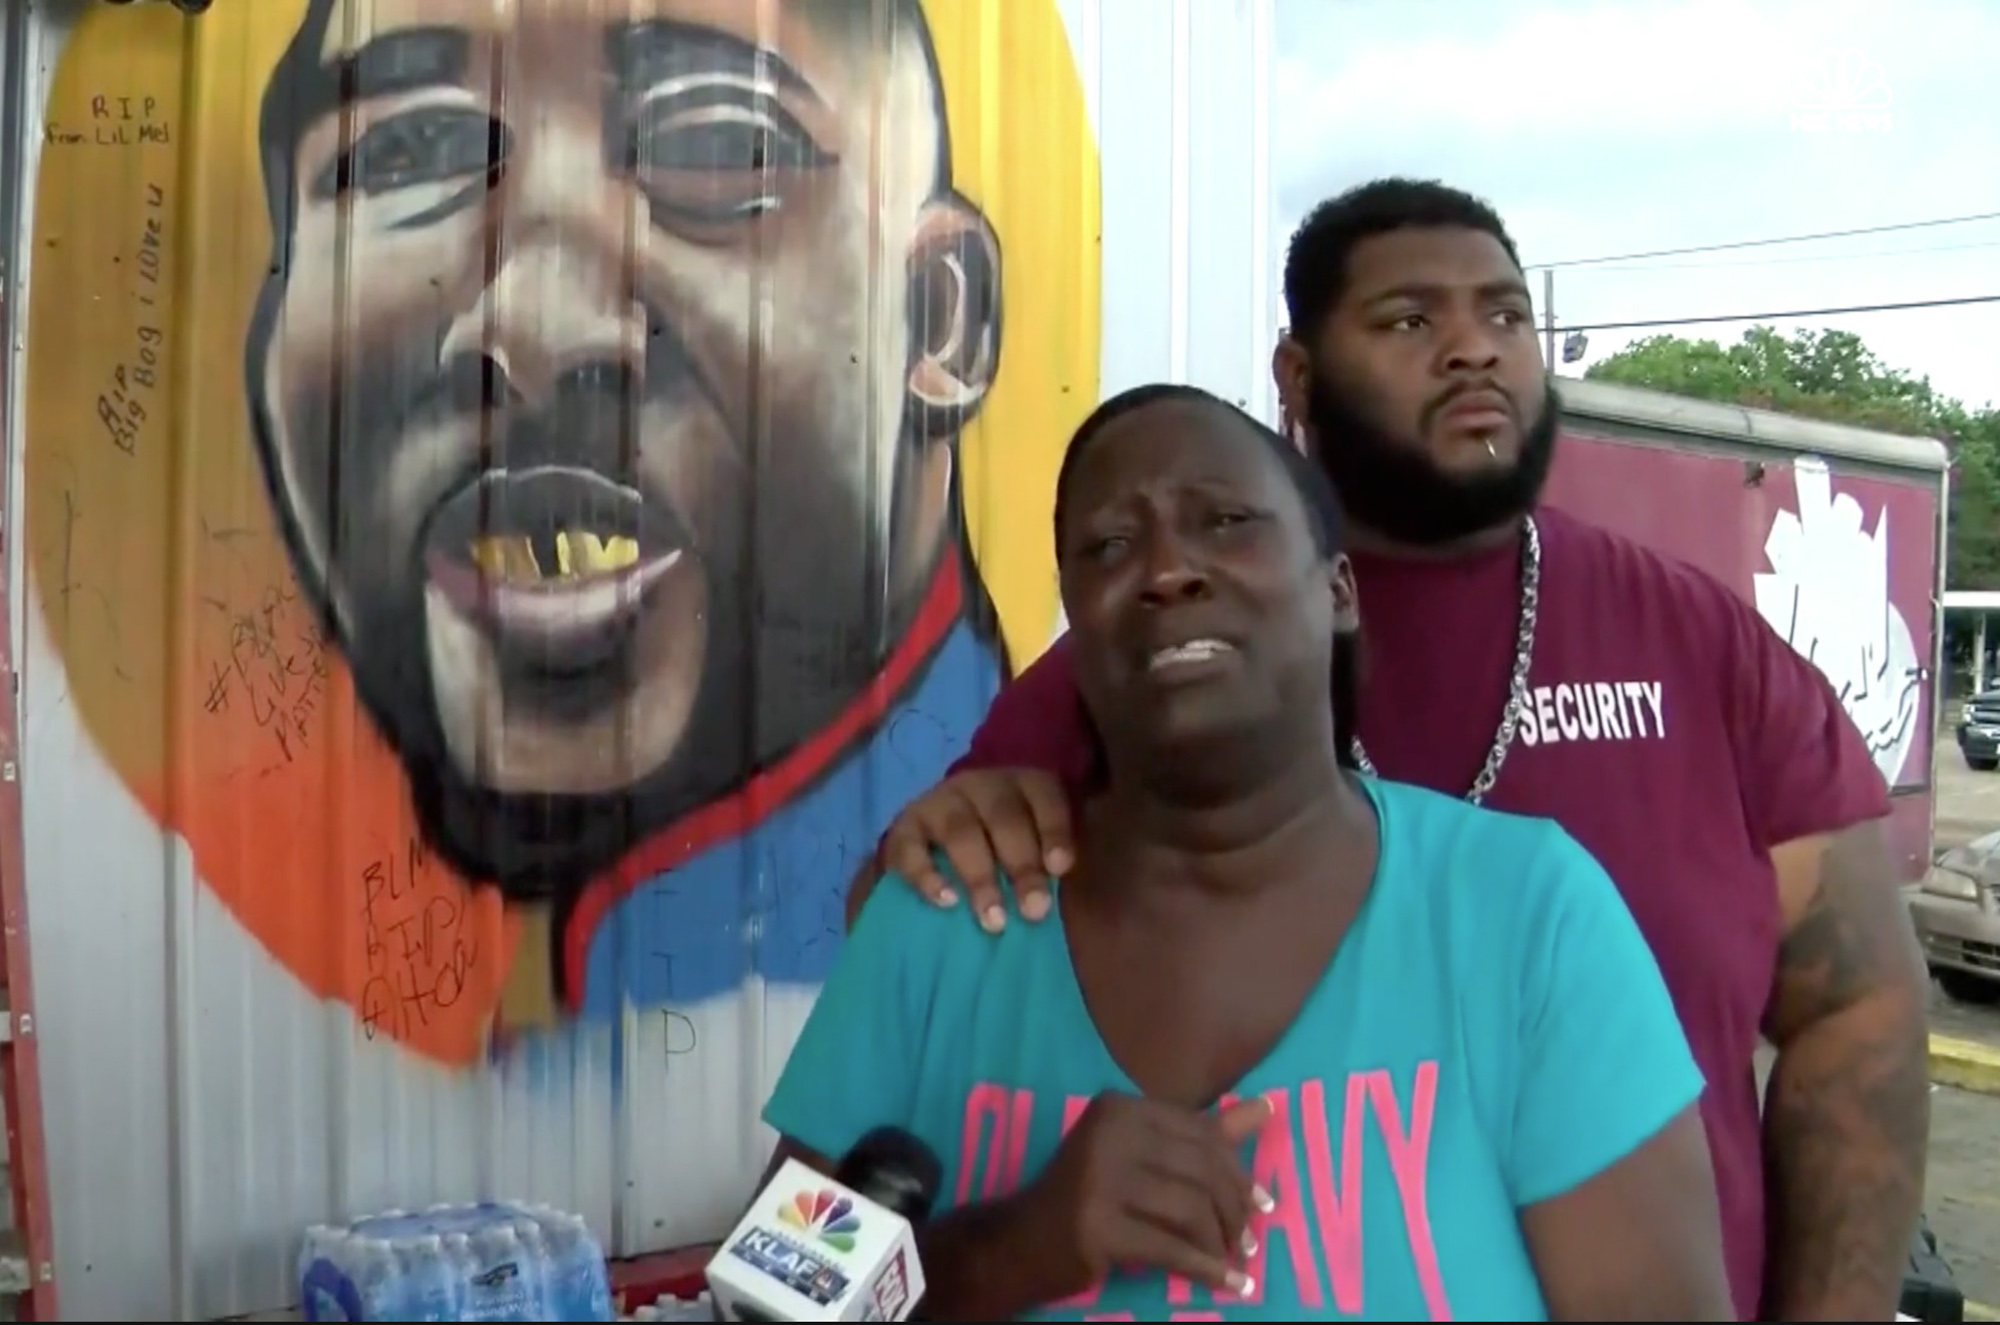 Alton Sterling's aunt, Veda Washington-Abusaleh, makes an emotional plea to end "bloodshed" after the deaths of three Baton Rouge police officers. (NBC News)